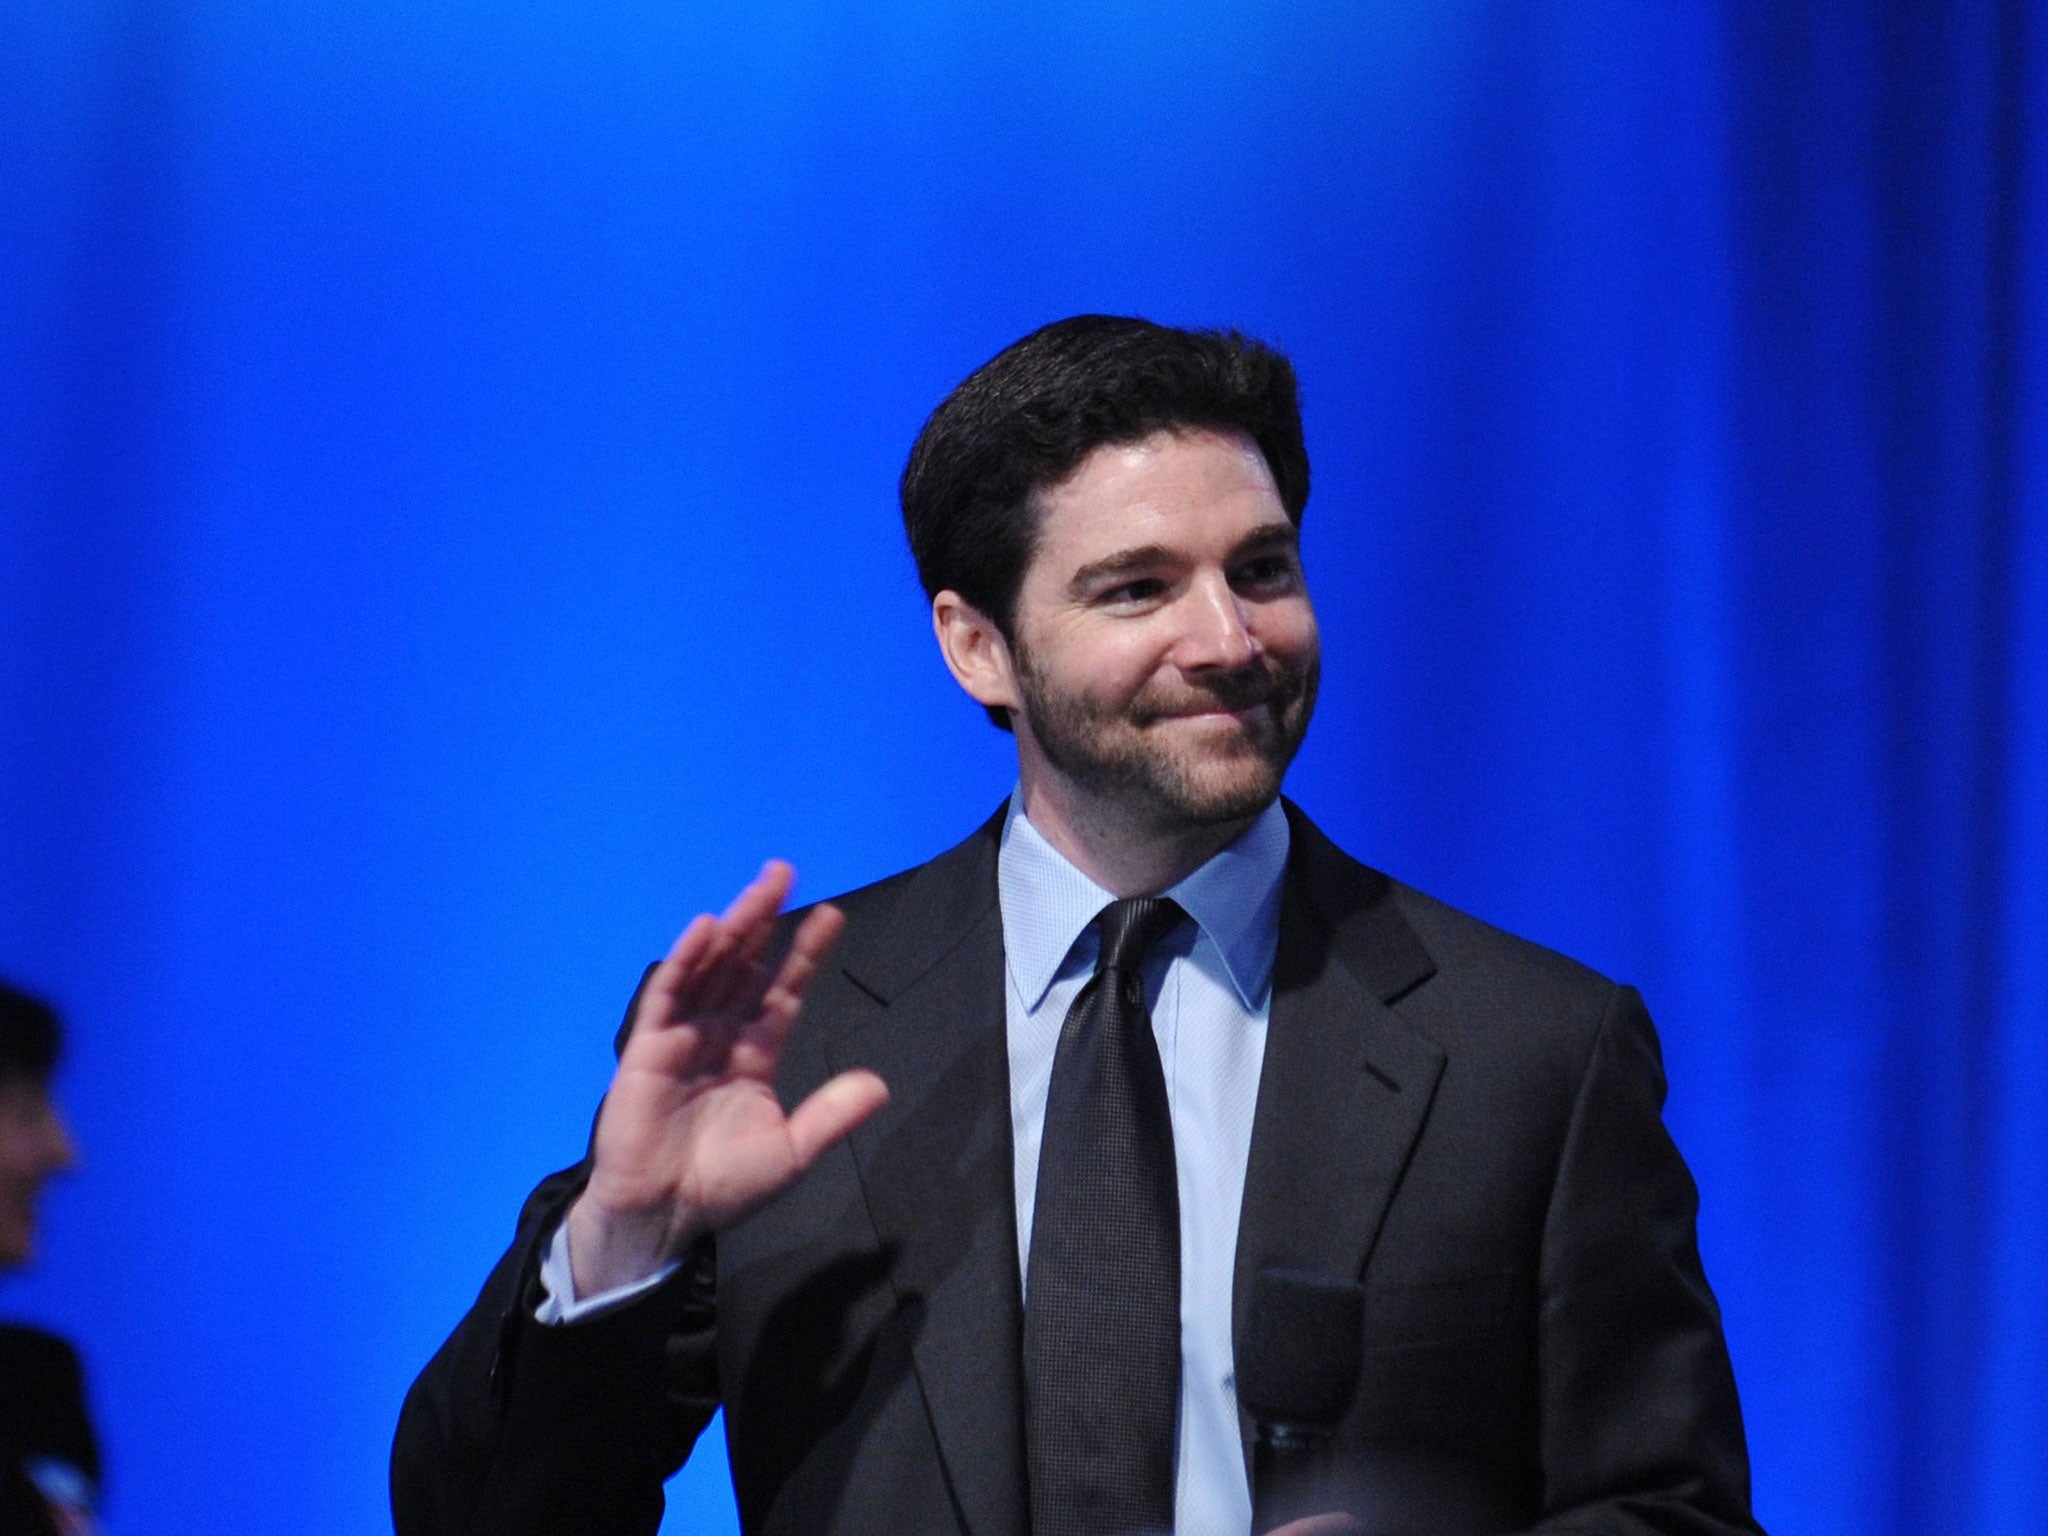 Jeff Weiner has presided over a period of sustained growth at LinkedIn since he arrived from Yahoo in 2008